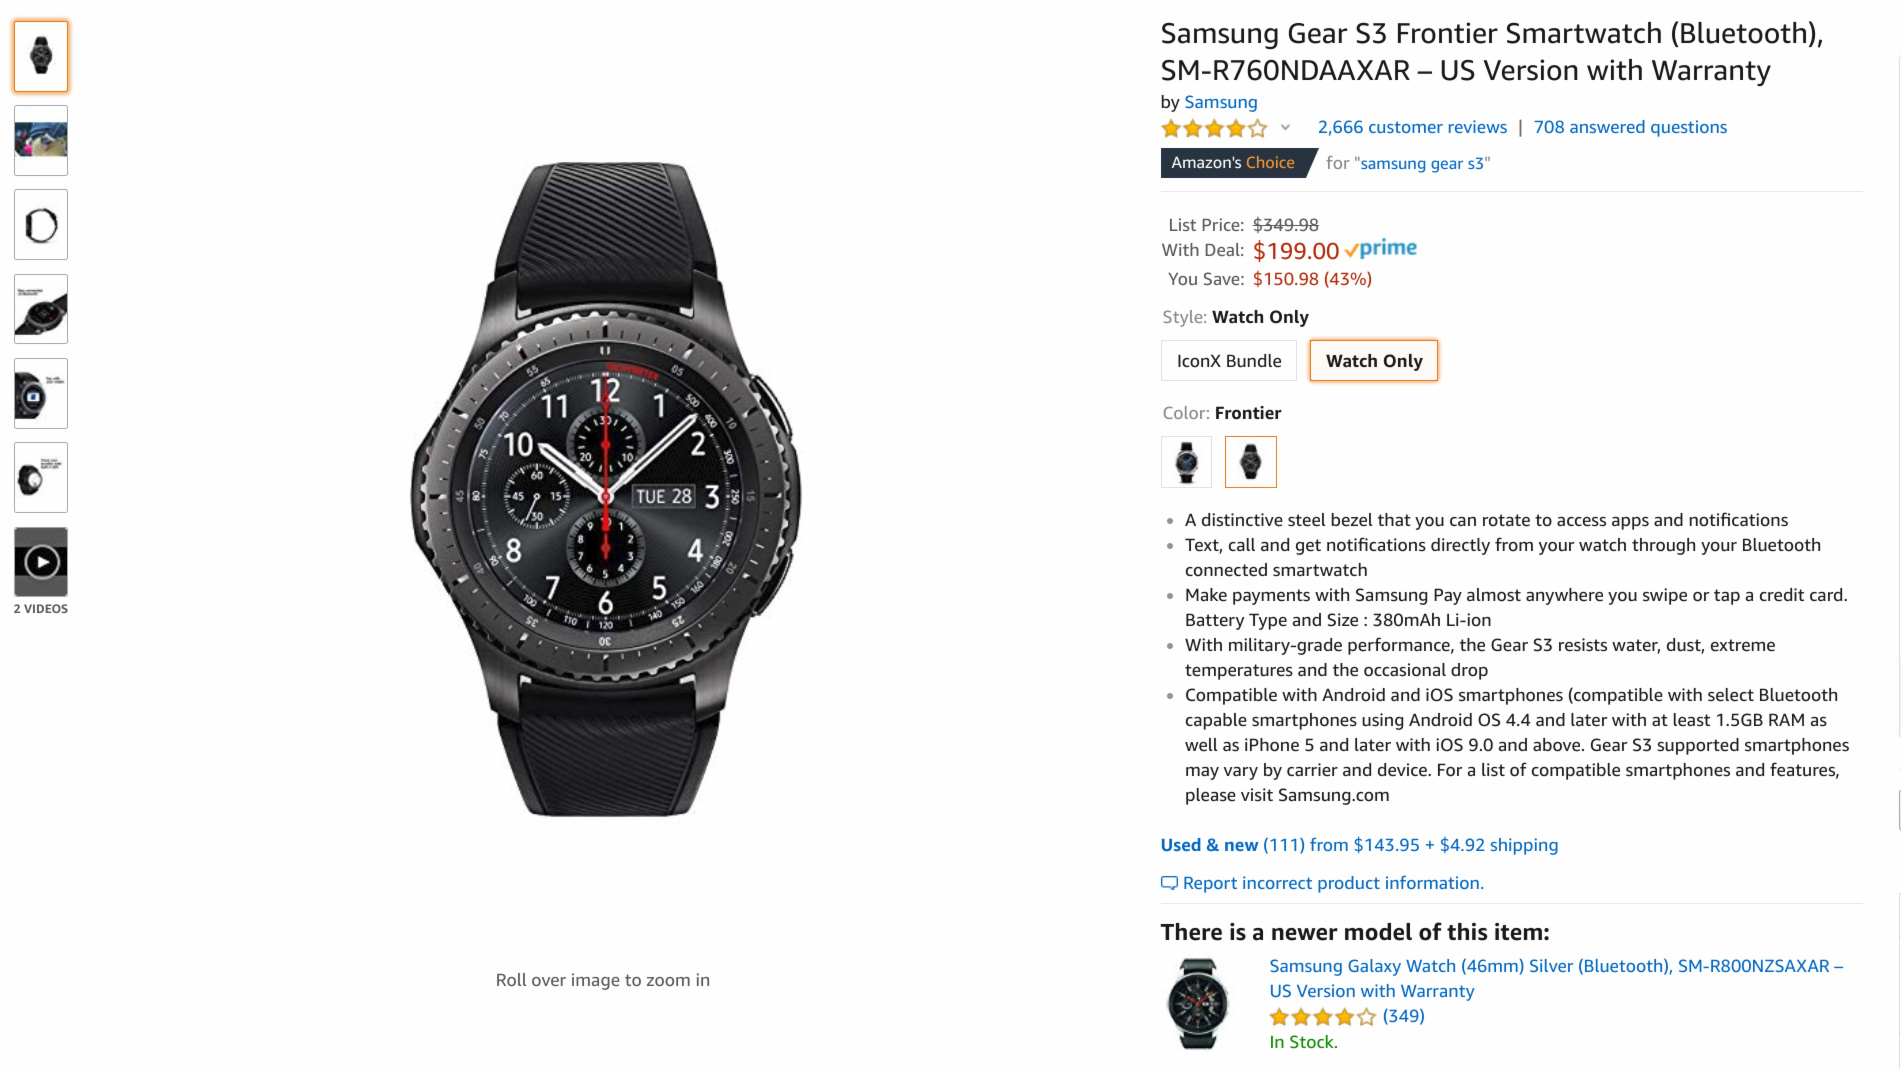 Deal on the Samsung Gear S3 Frontier